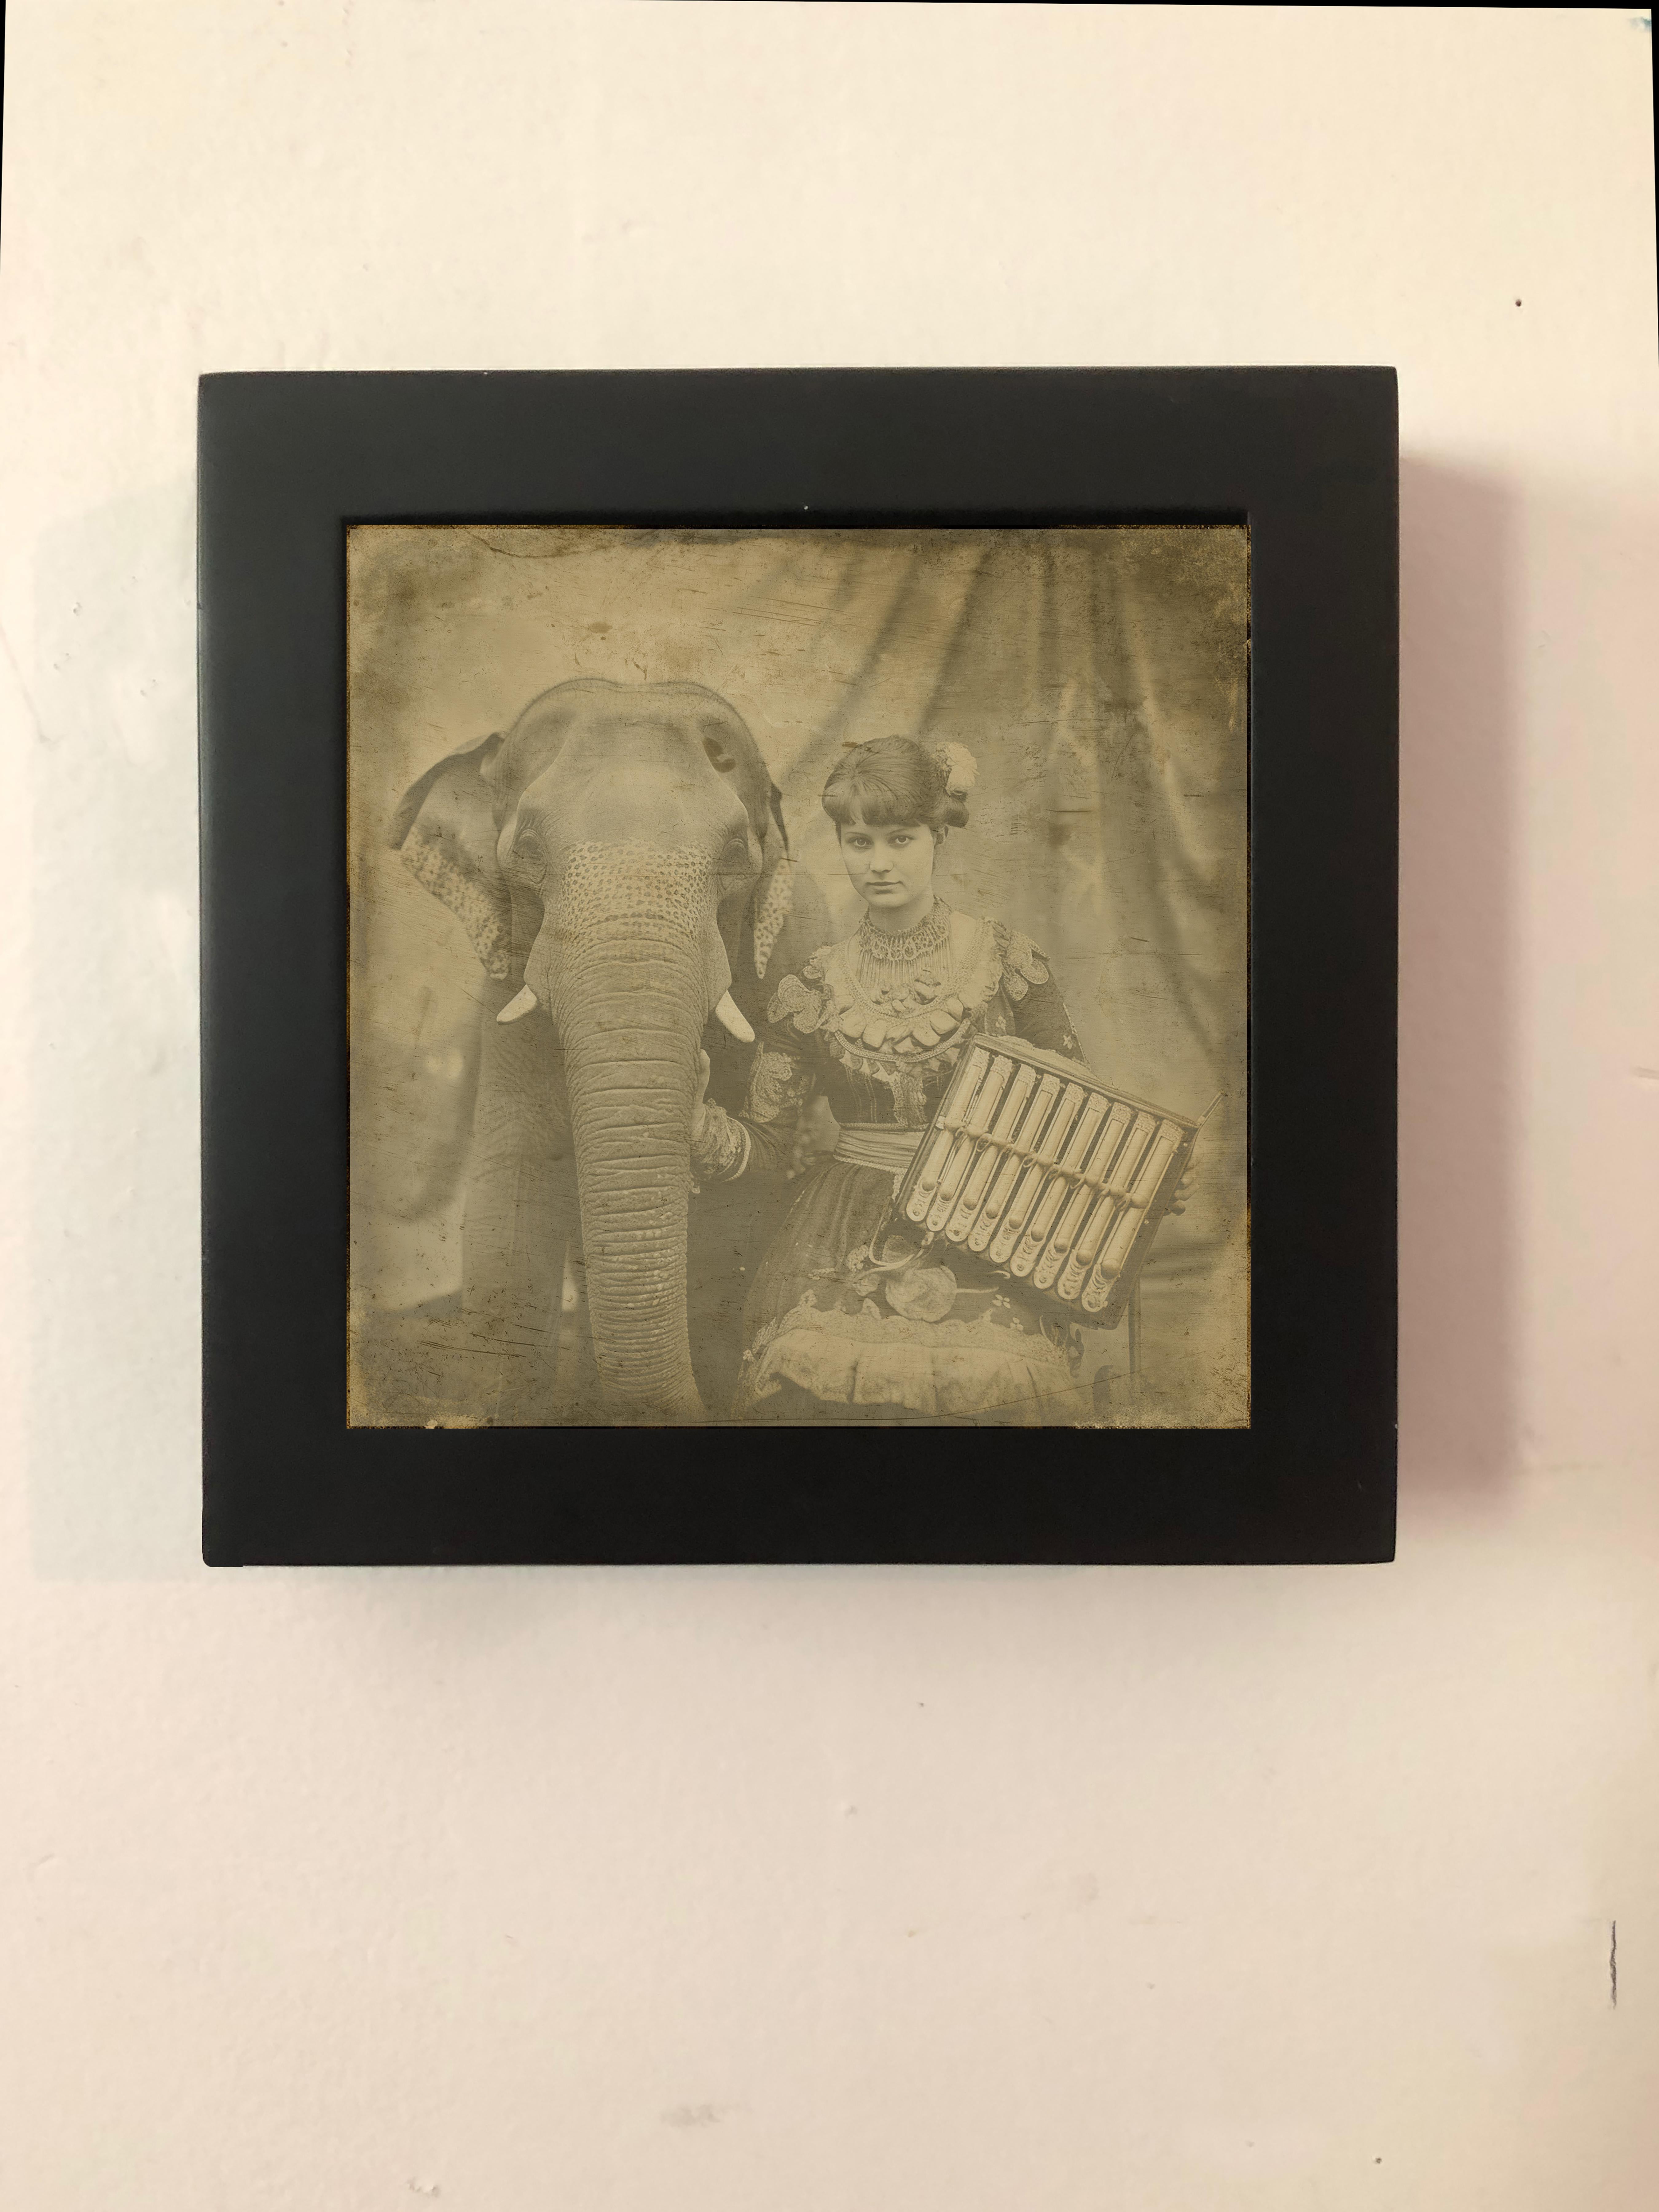 Eliese and her talking elephant =xotic daguerreotype reproduction Framed - Surrealist Photograph by FPA Francis Pavy Artist